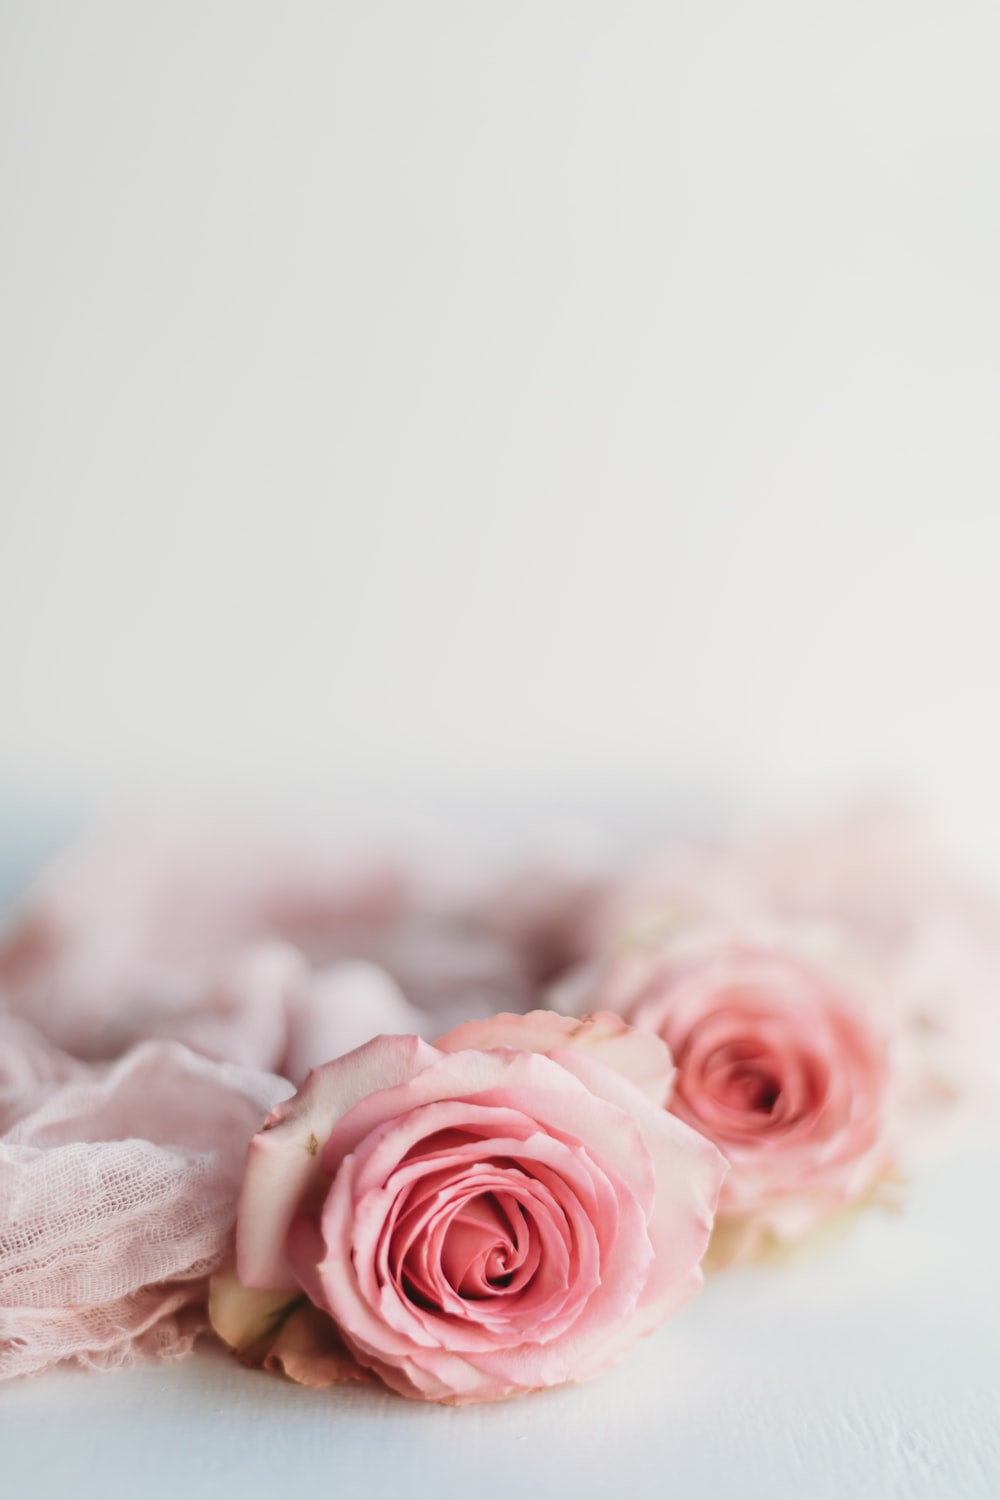 Pink Roses Pictures Image